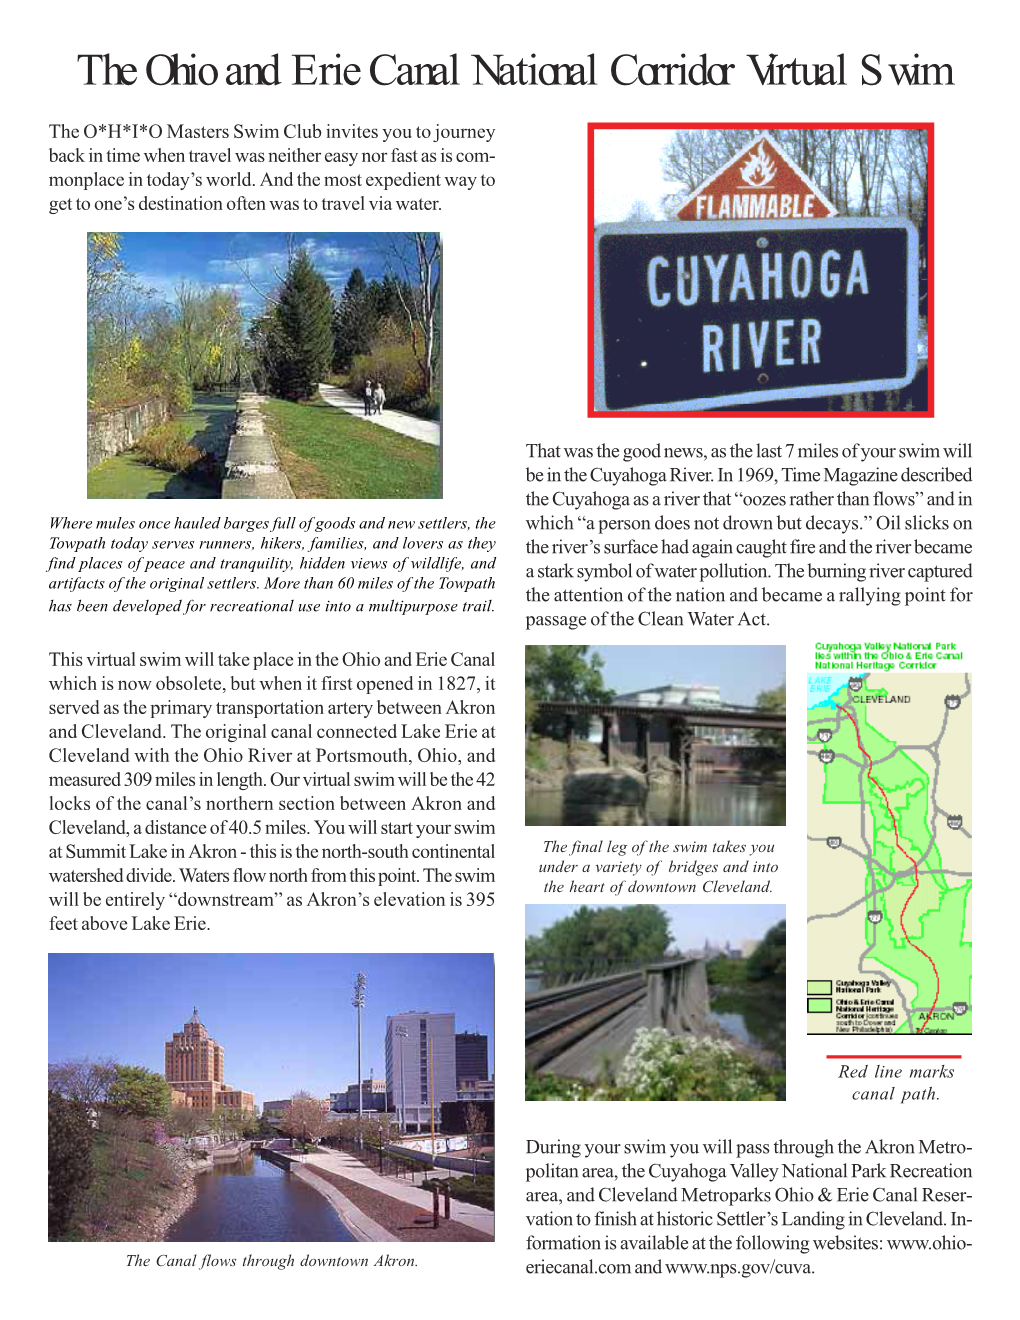 Ohio: the Ohio and Erie Canal National